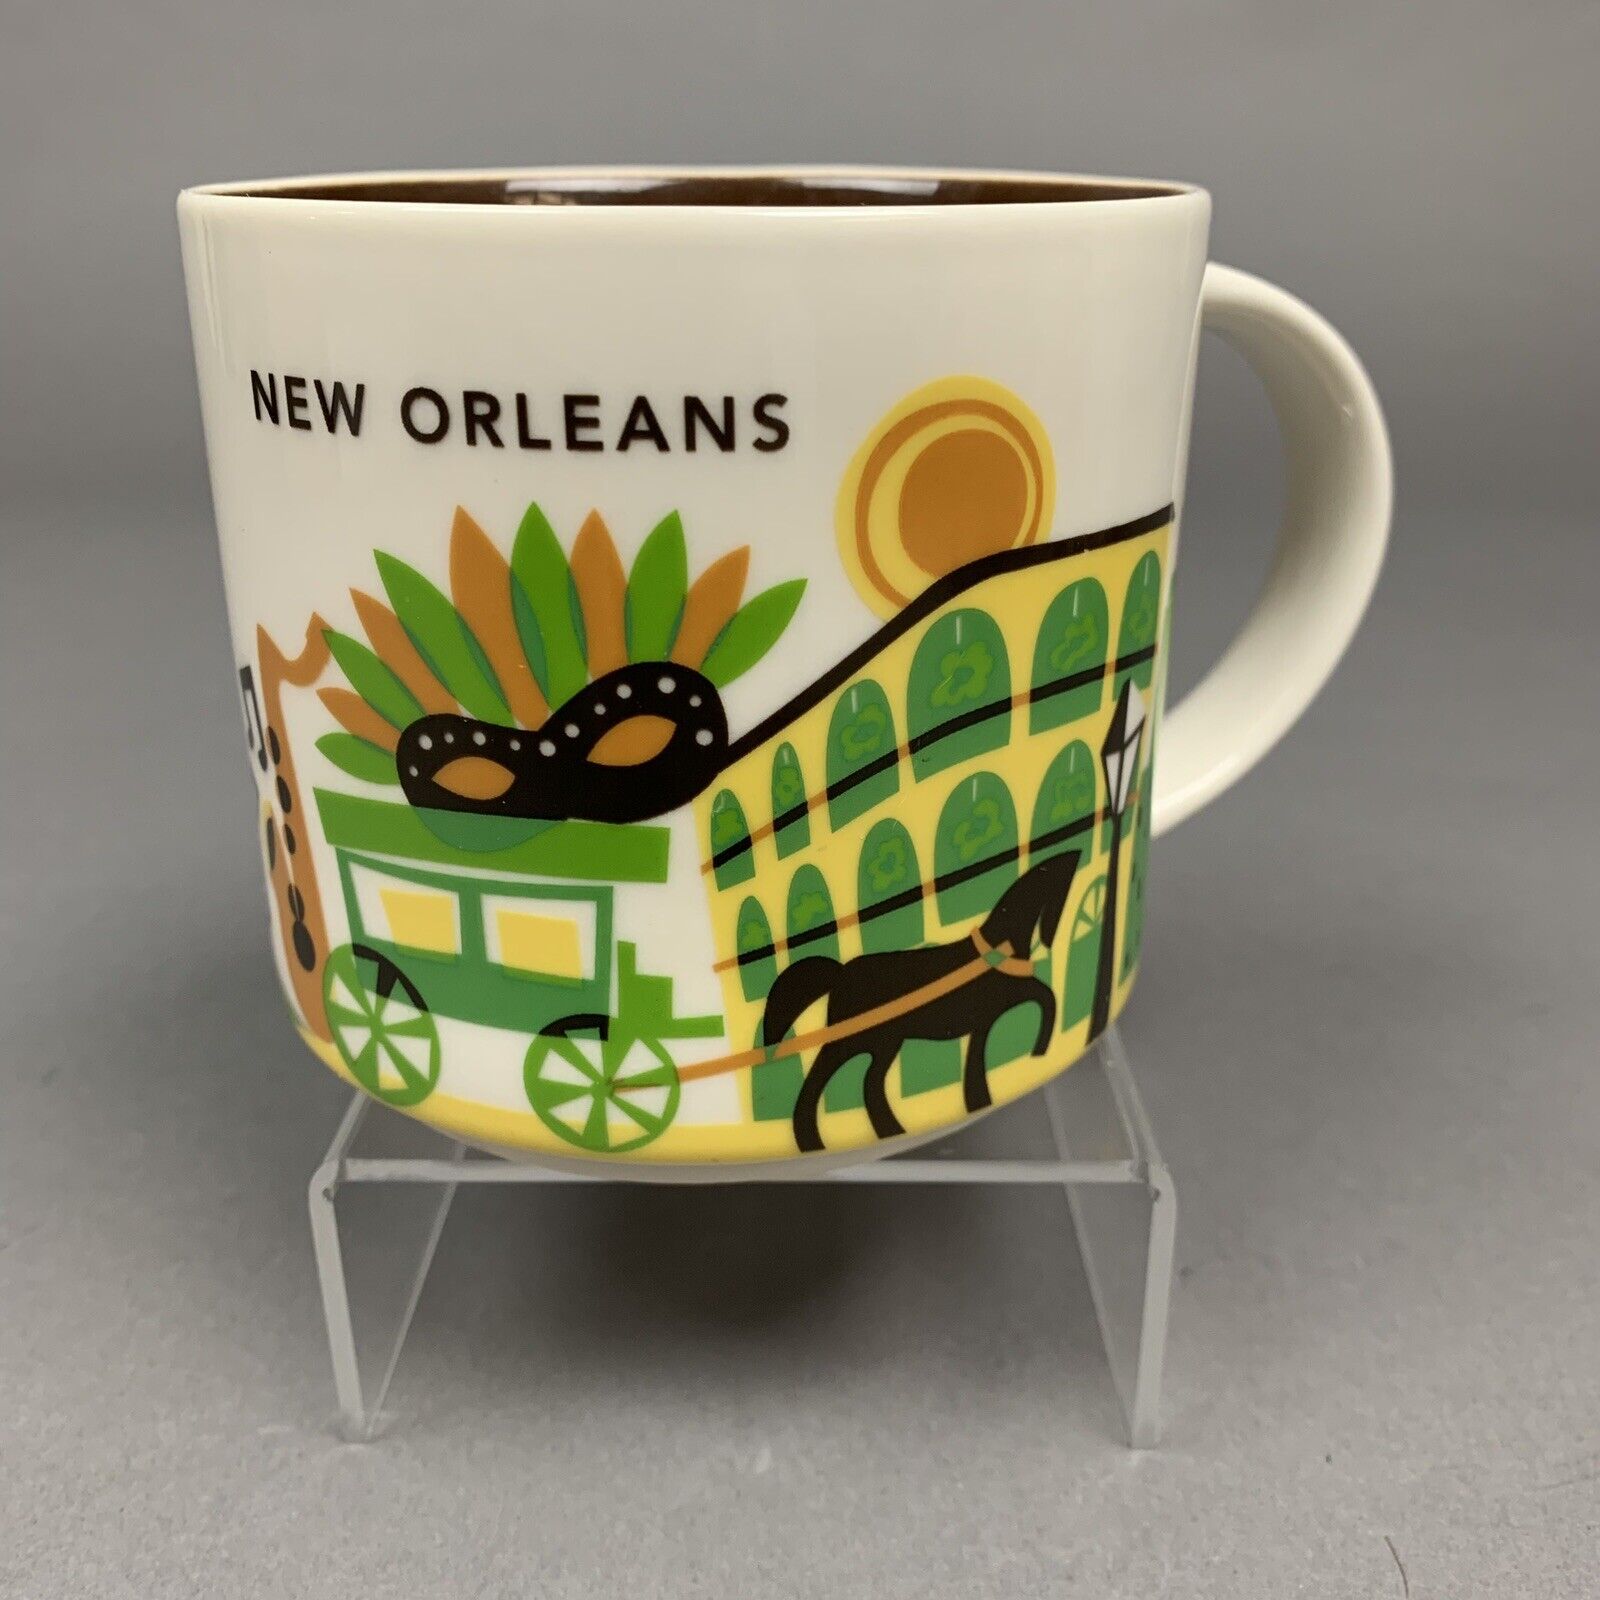 Starbucks Mug You Are Here Collection 2017 New Orleans Louisiana Coffee Tea cup